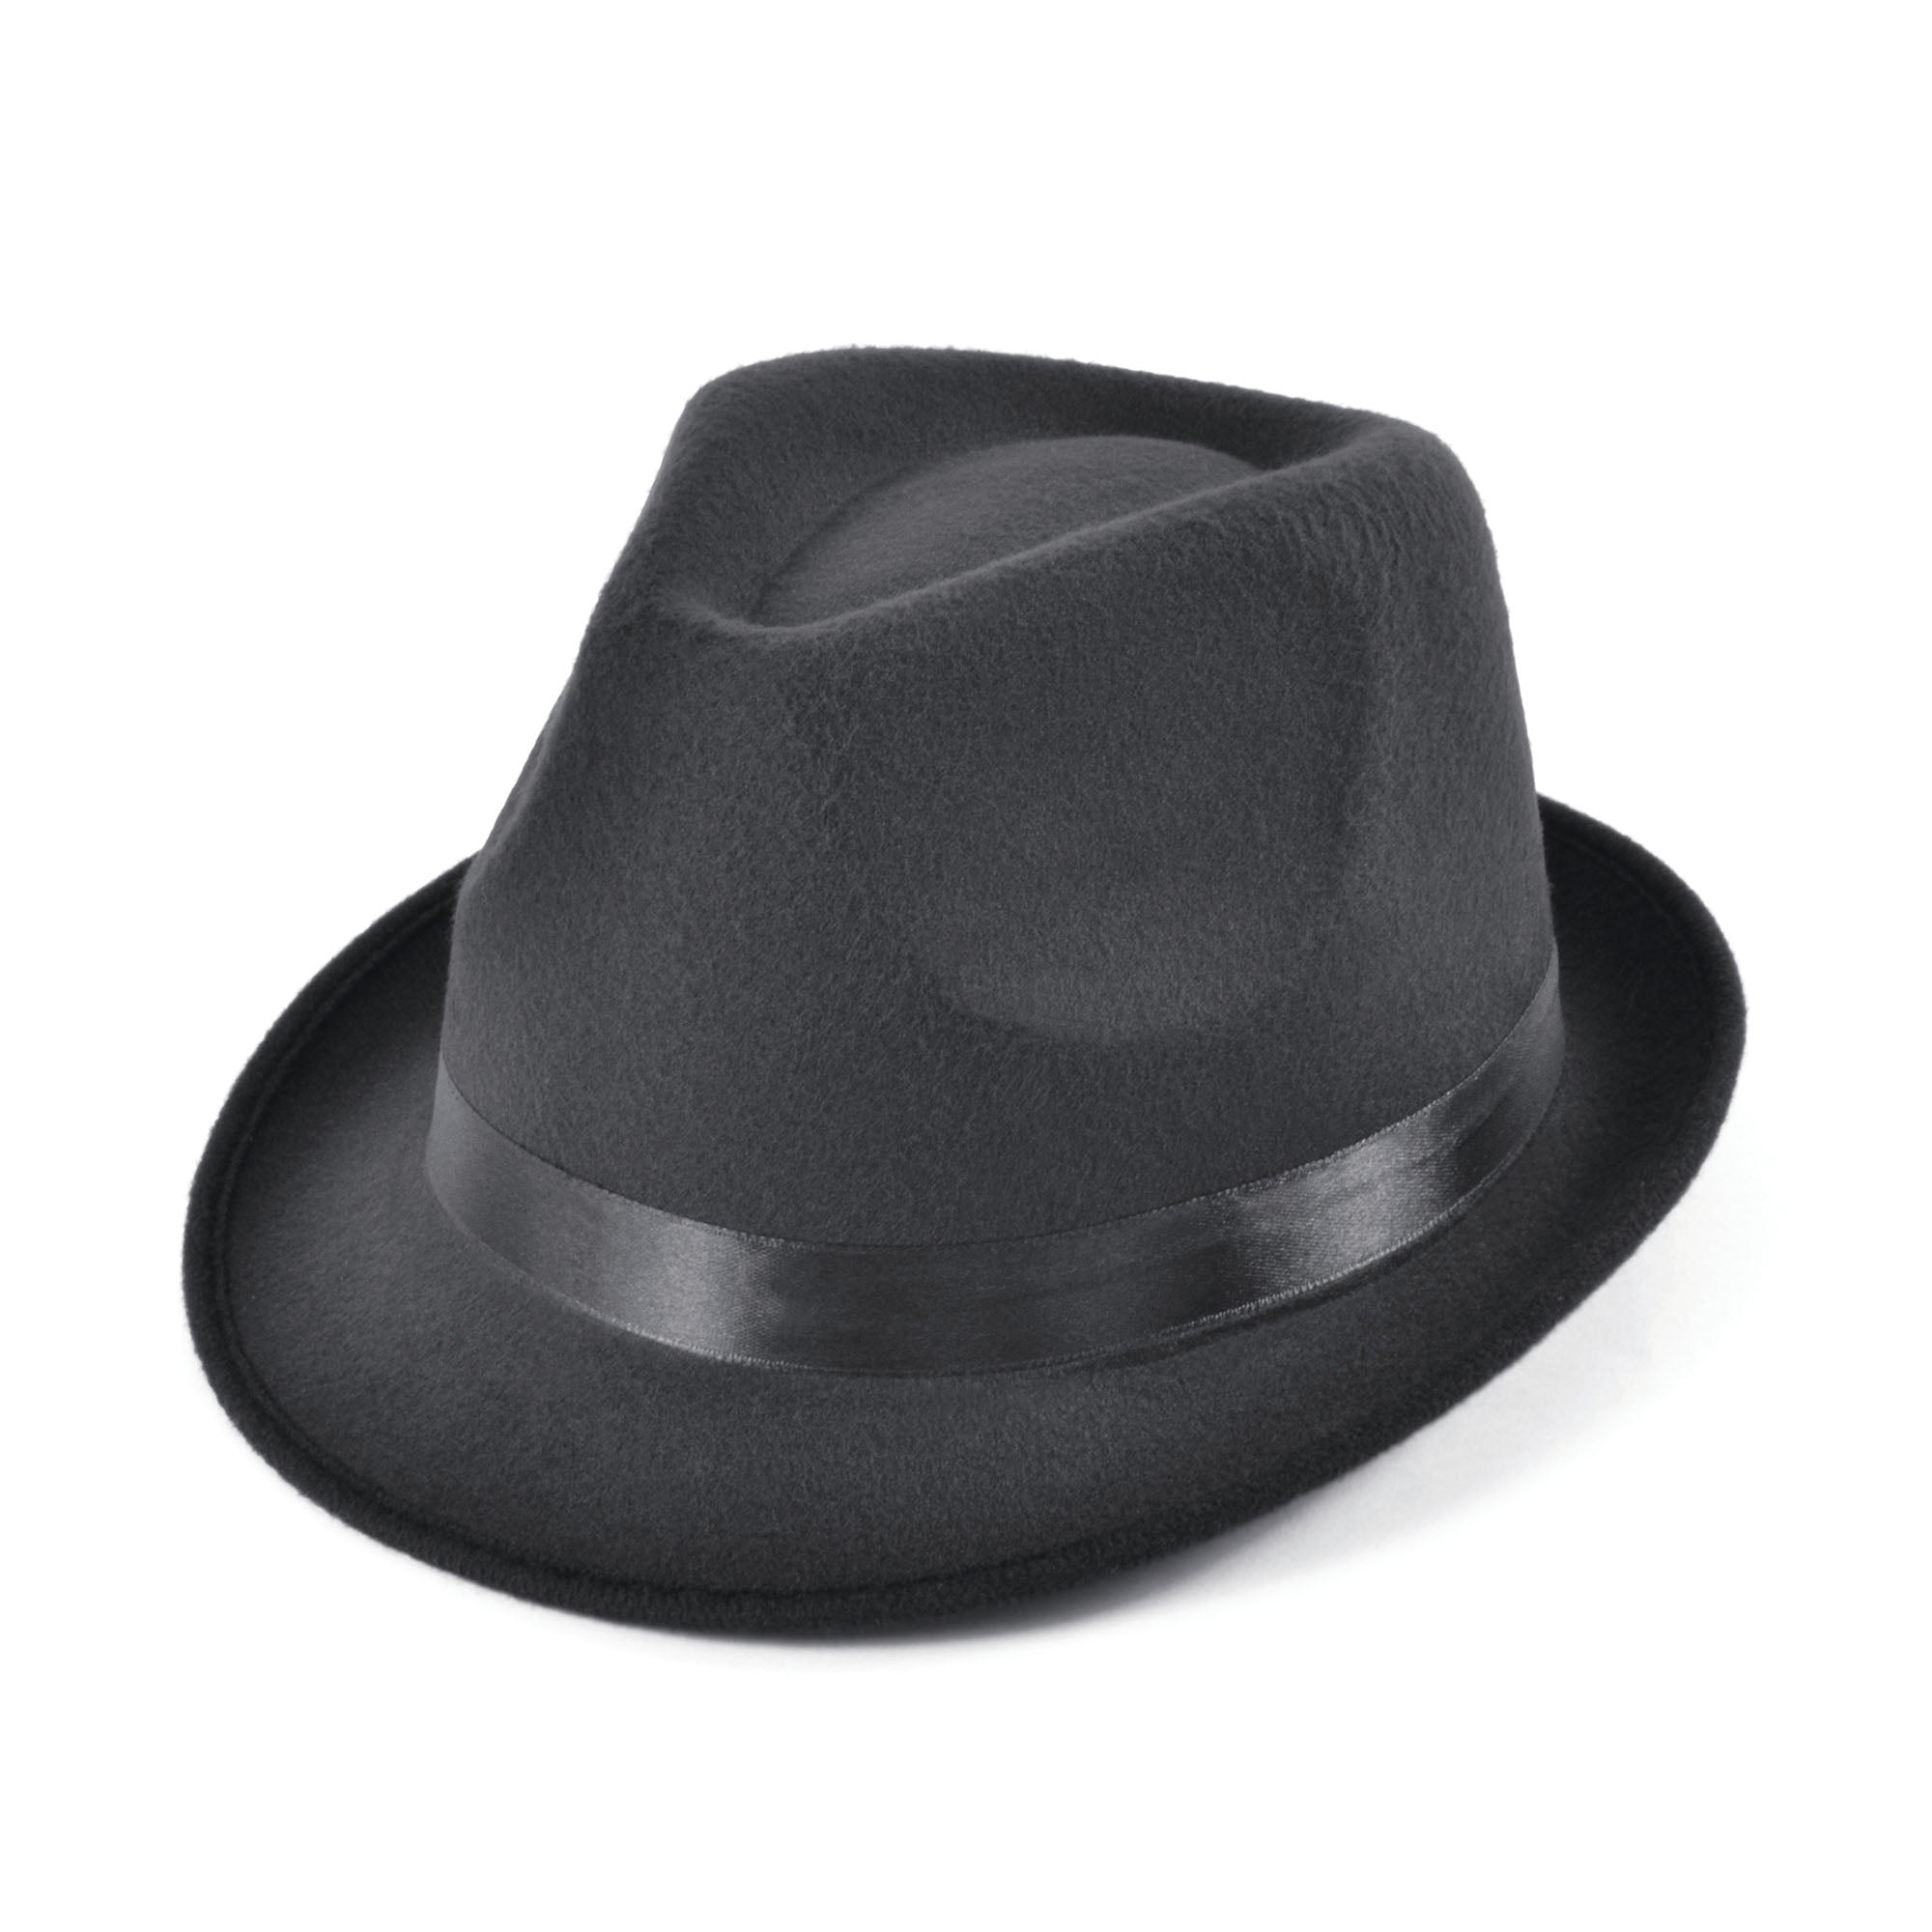  Deluxe Blues Brothers Black Fedora Hat